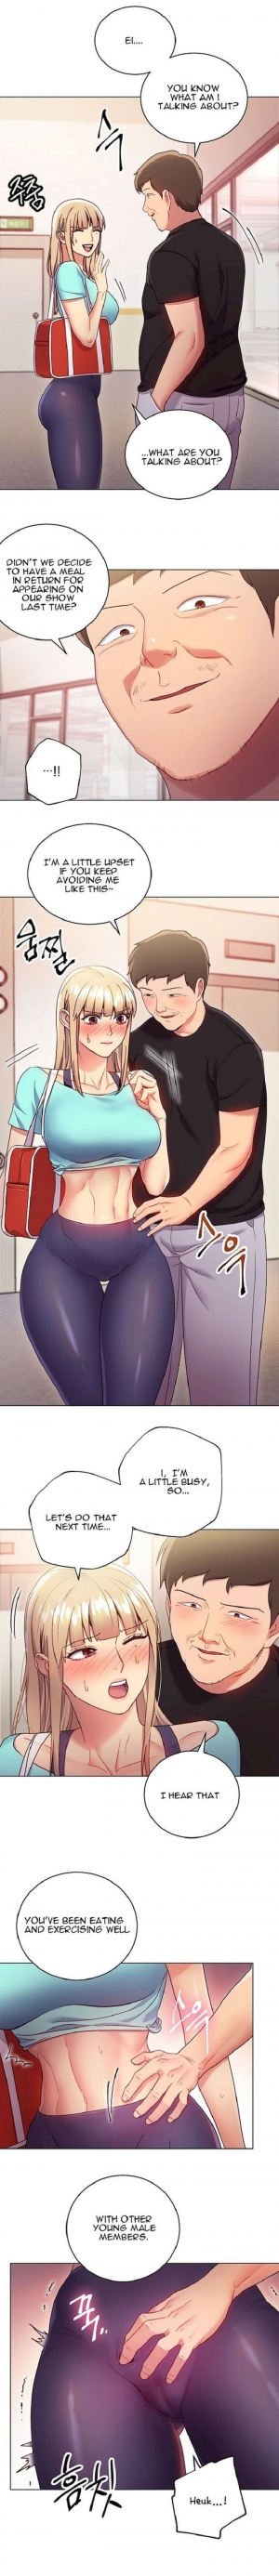 [Neck Pilllow] Stepmother Friends Ch.18/? [English] [Hentai Universe] - Page 151